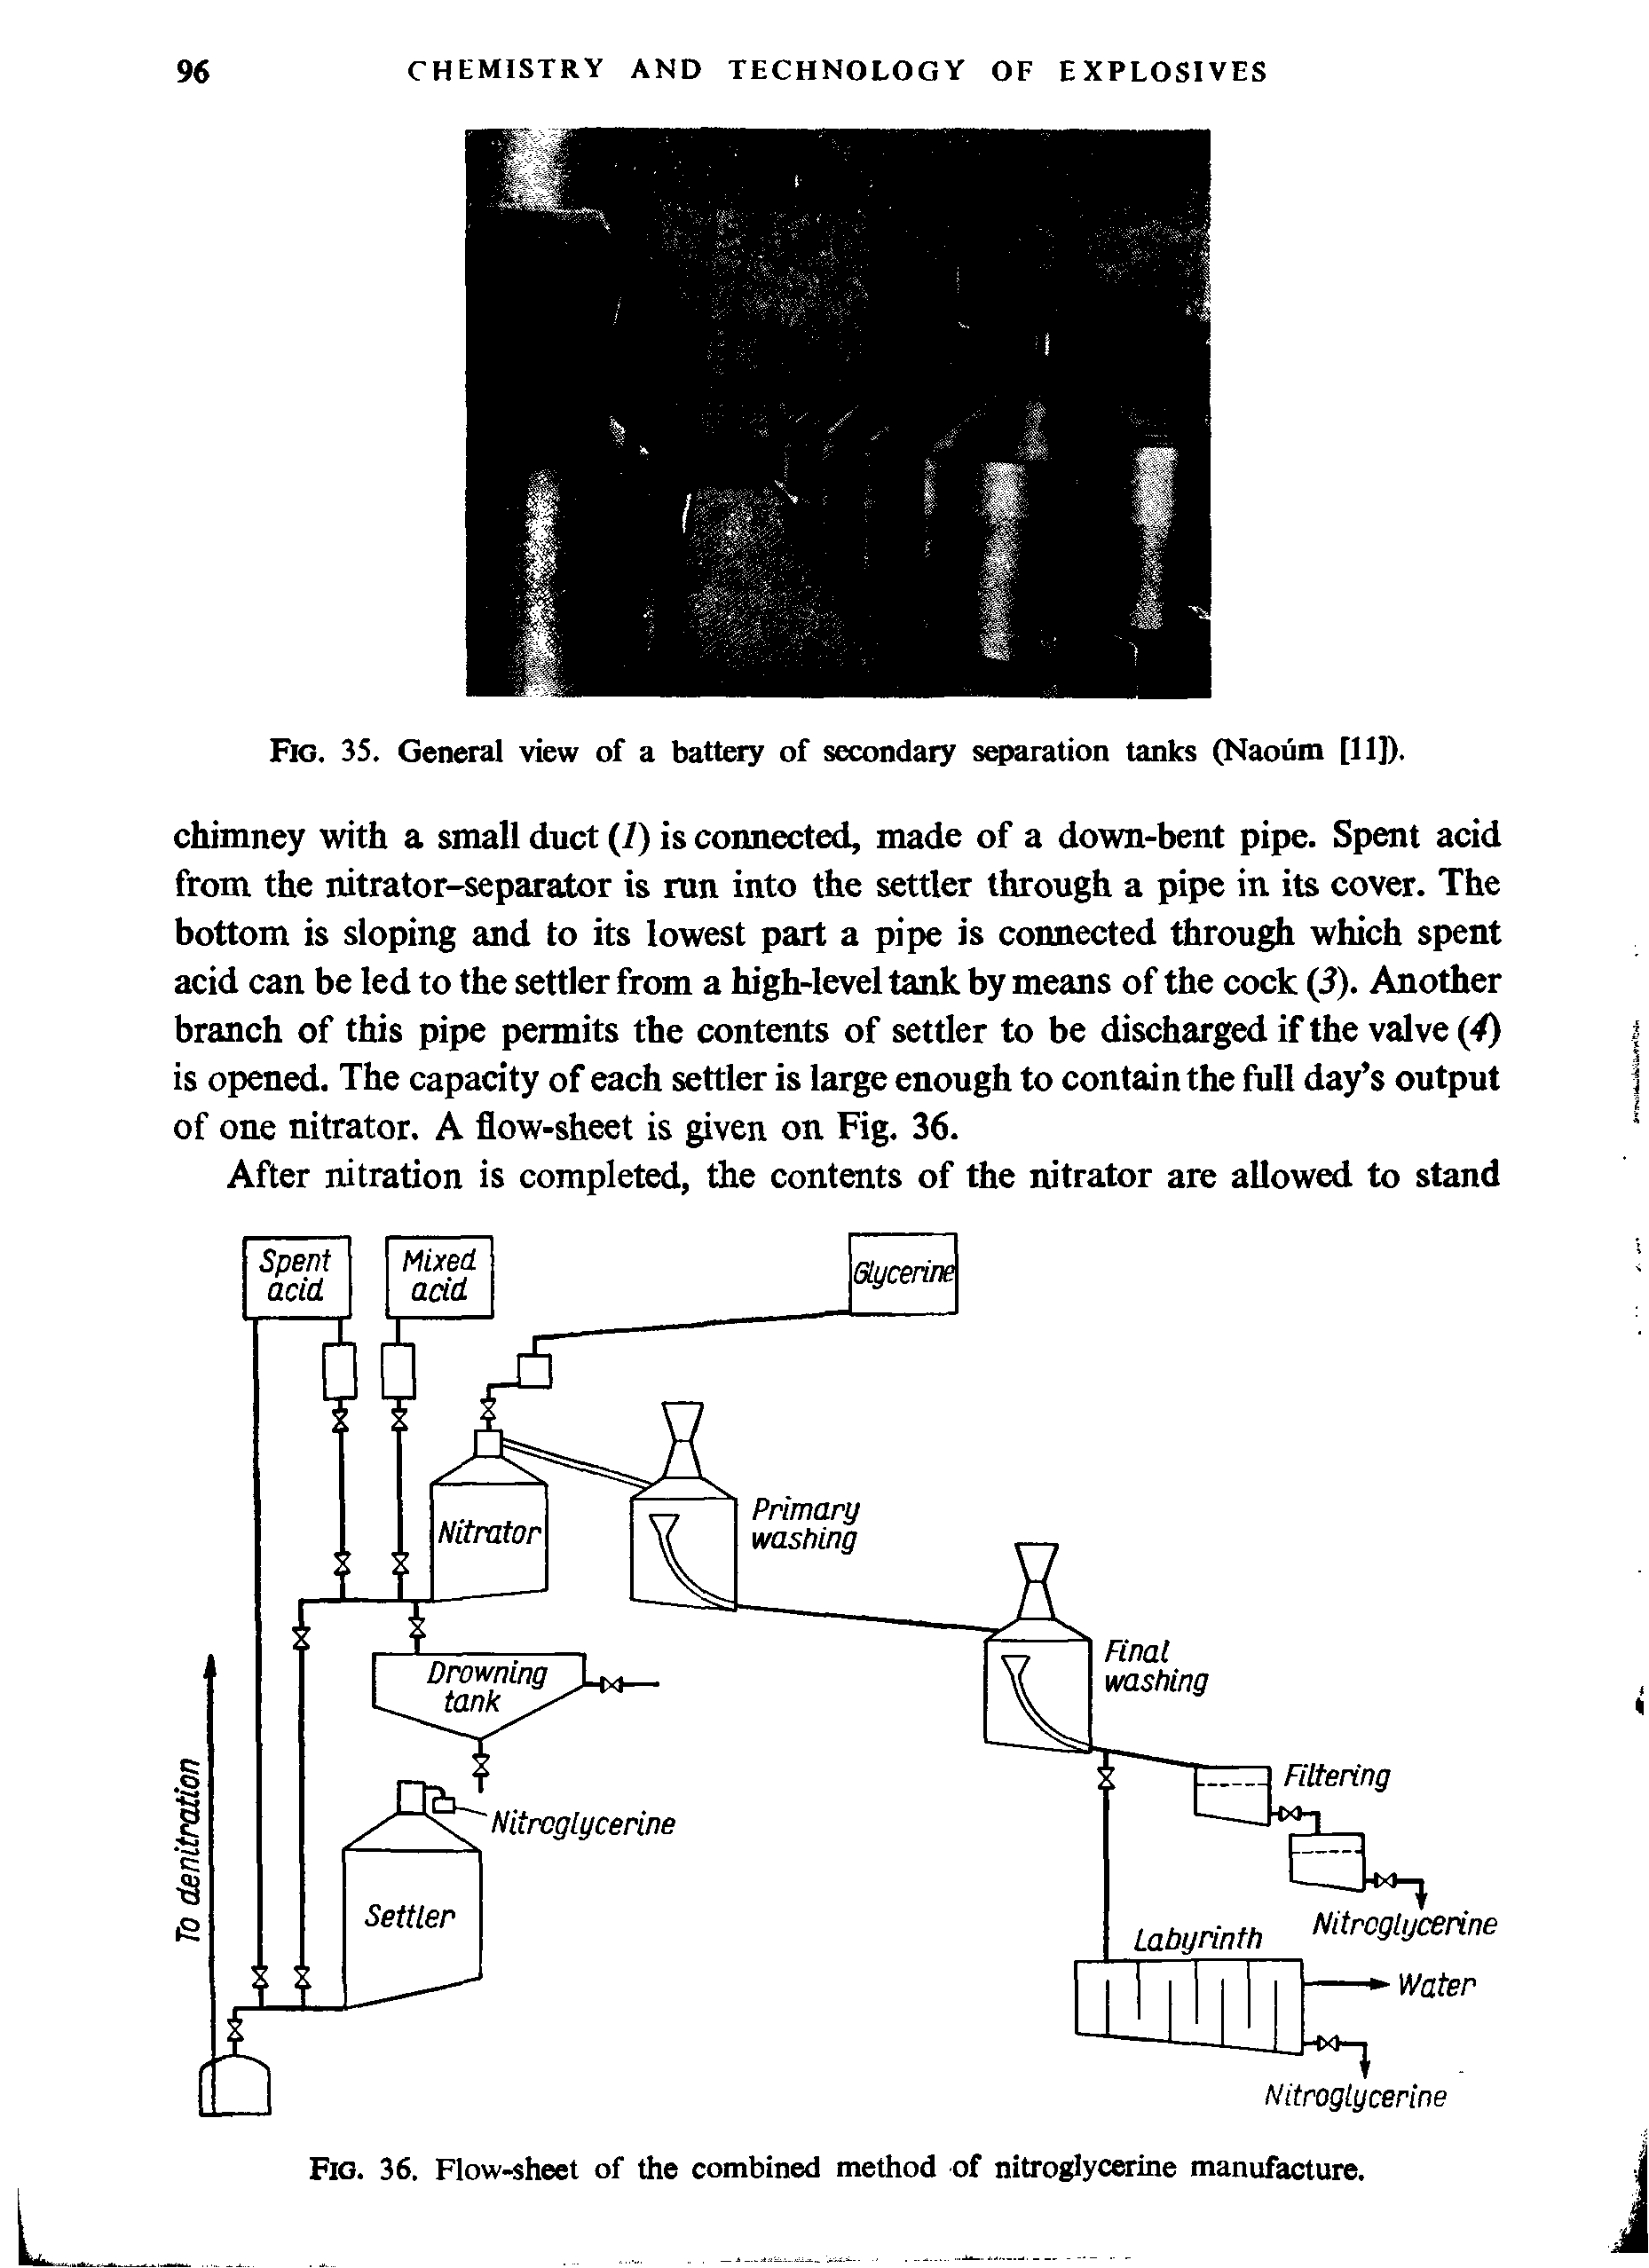 Fig. 36. Flow-sheet of the combined method of nitroglycerine manufacture.